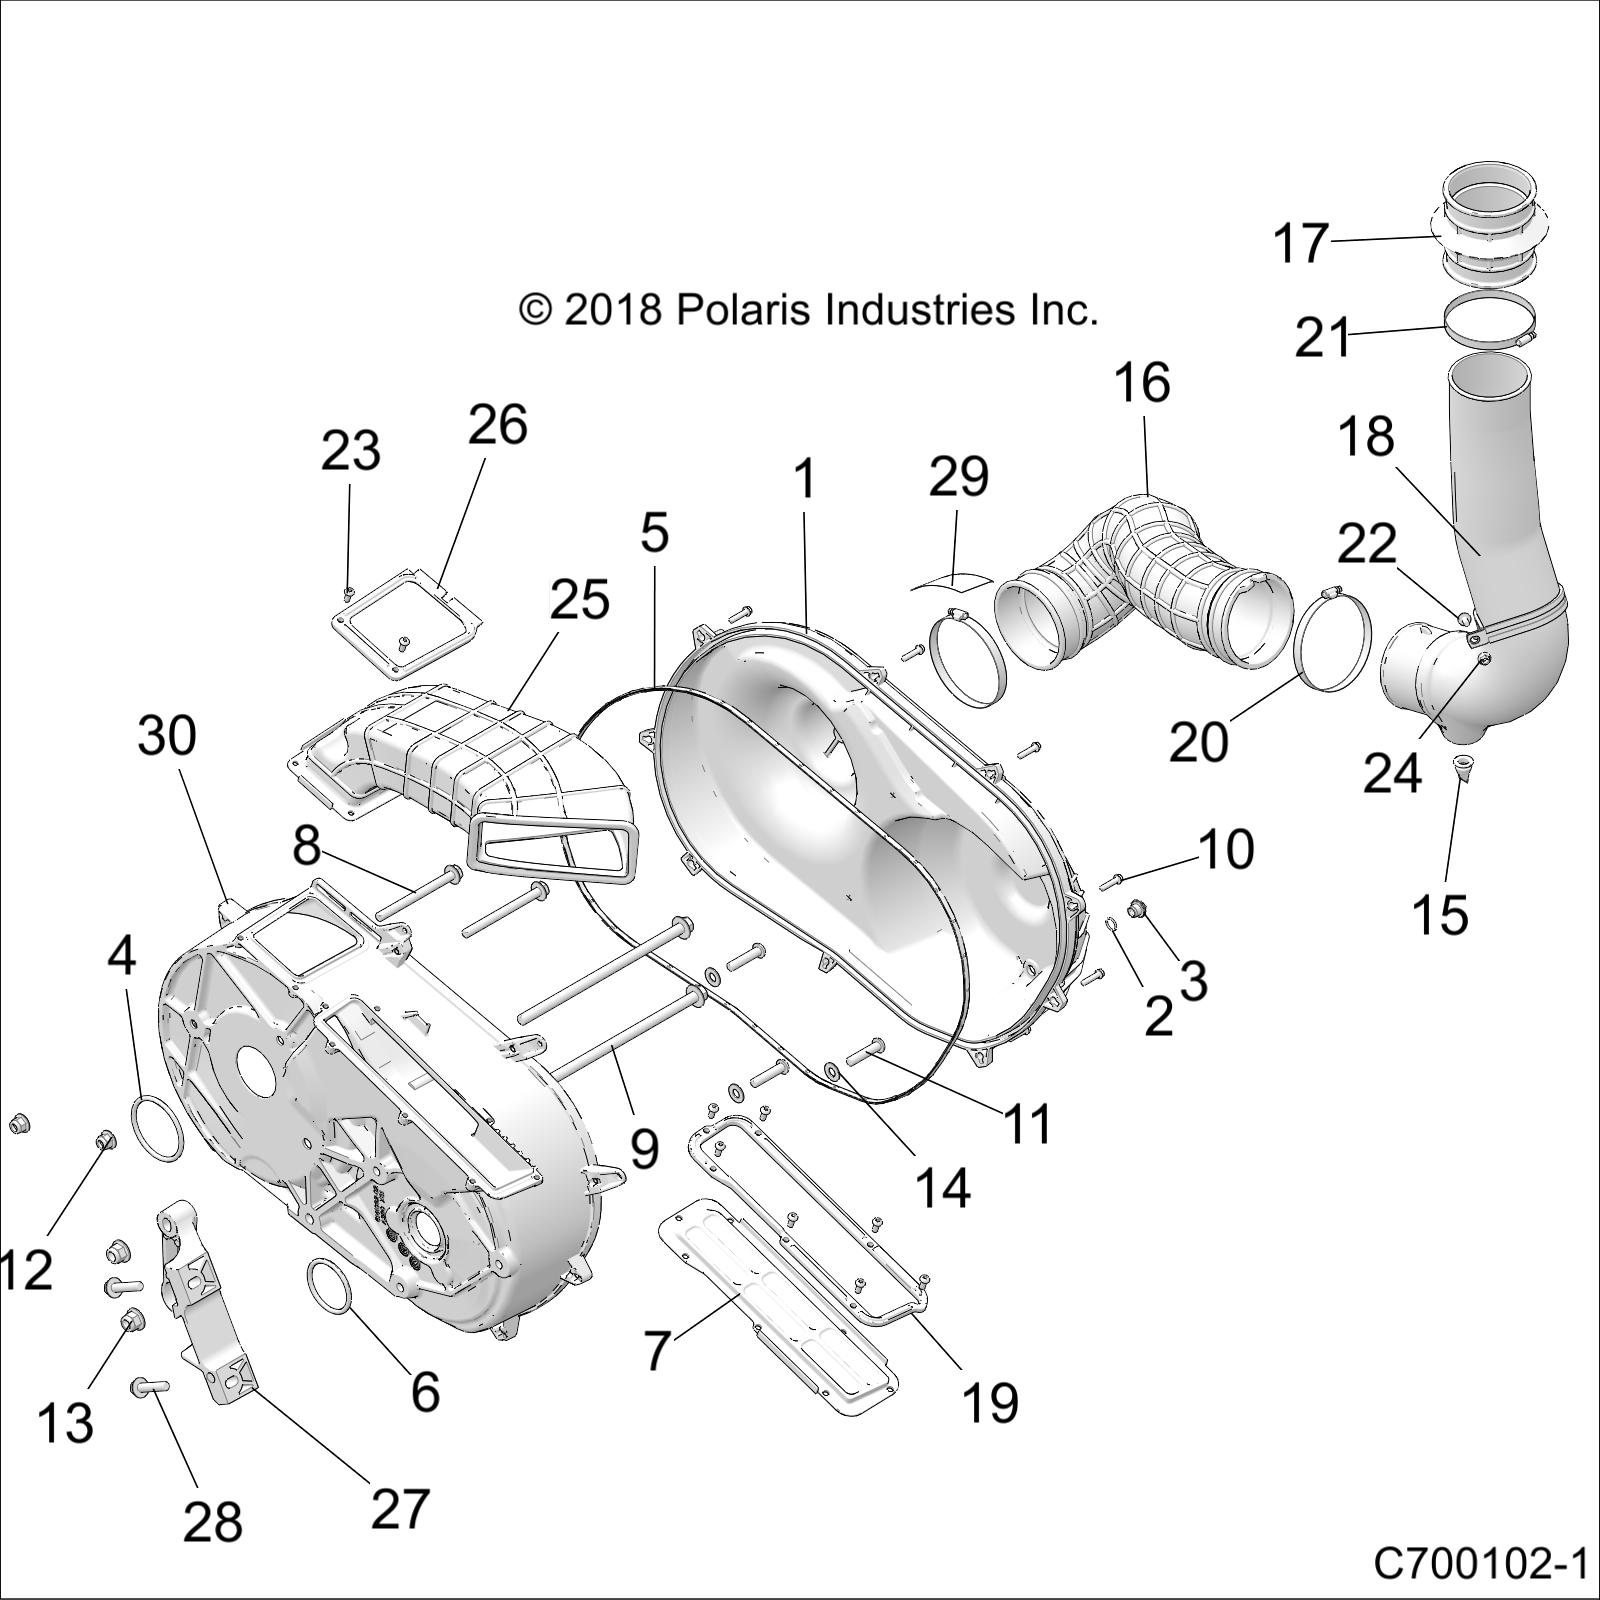 Part Number : 5141082 COVER-CLUTCH INNER MACH